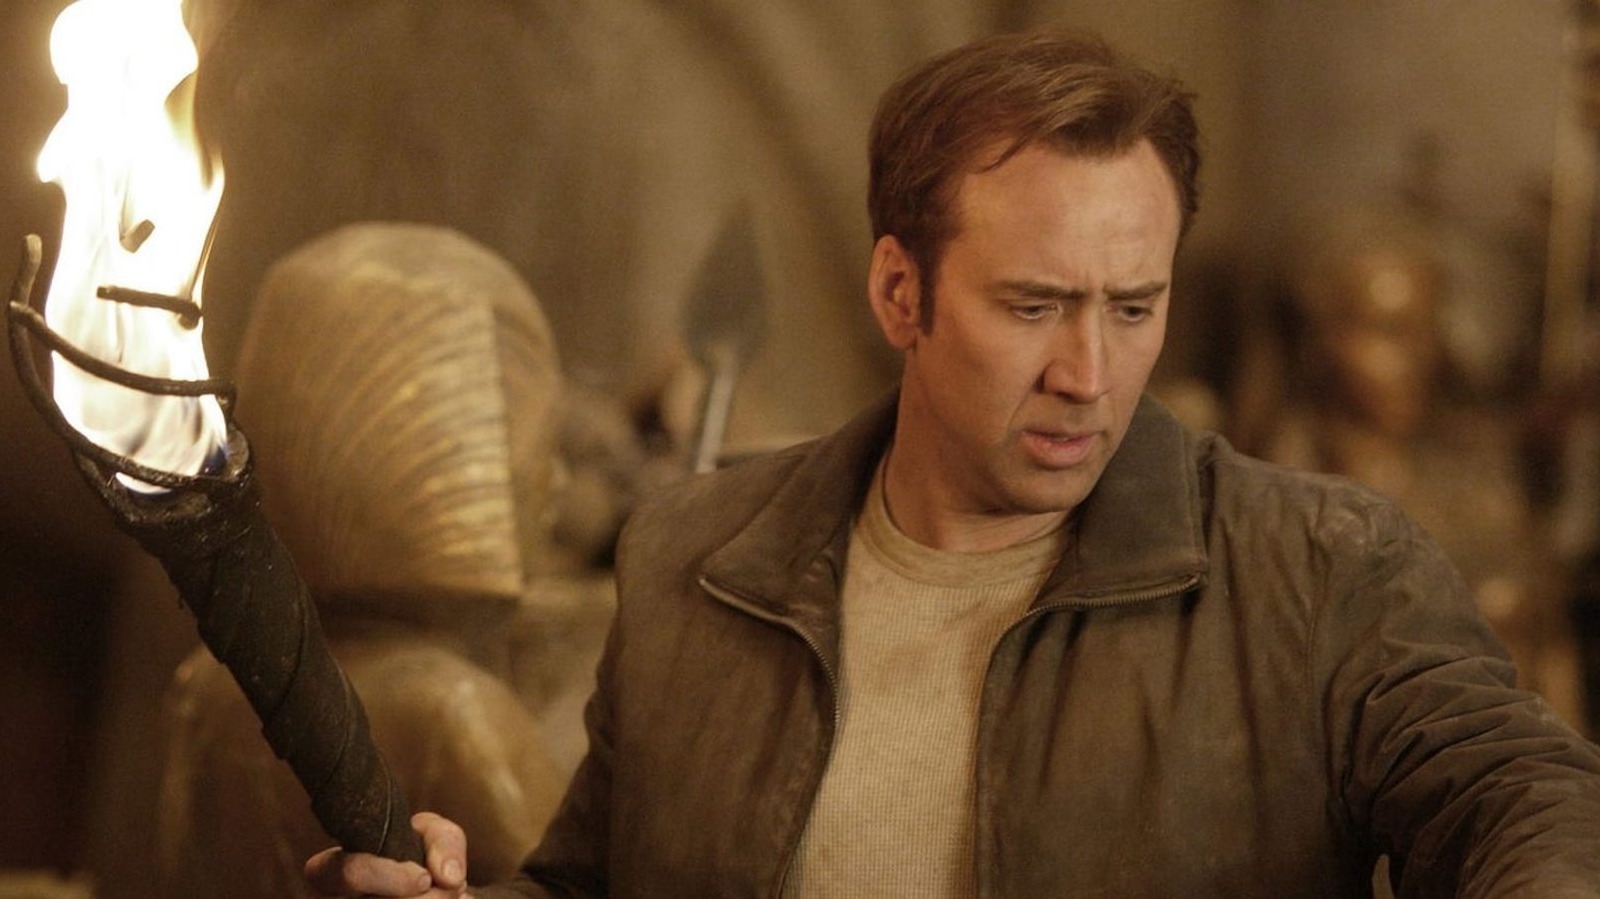 #Nicolas Cage Confirms National Treasure 3 Isn’t Happening, Breaks Our Hearts